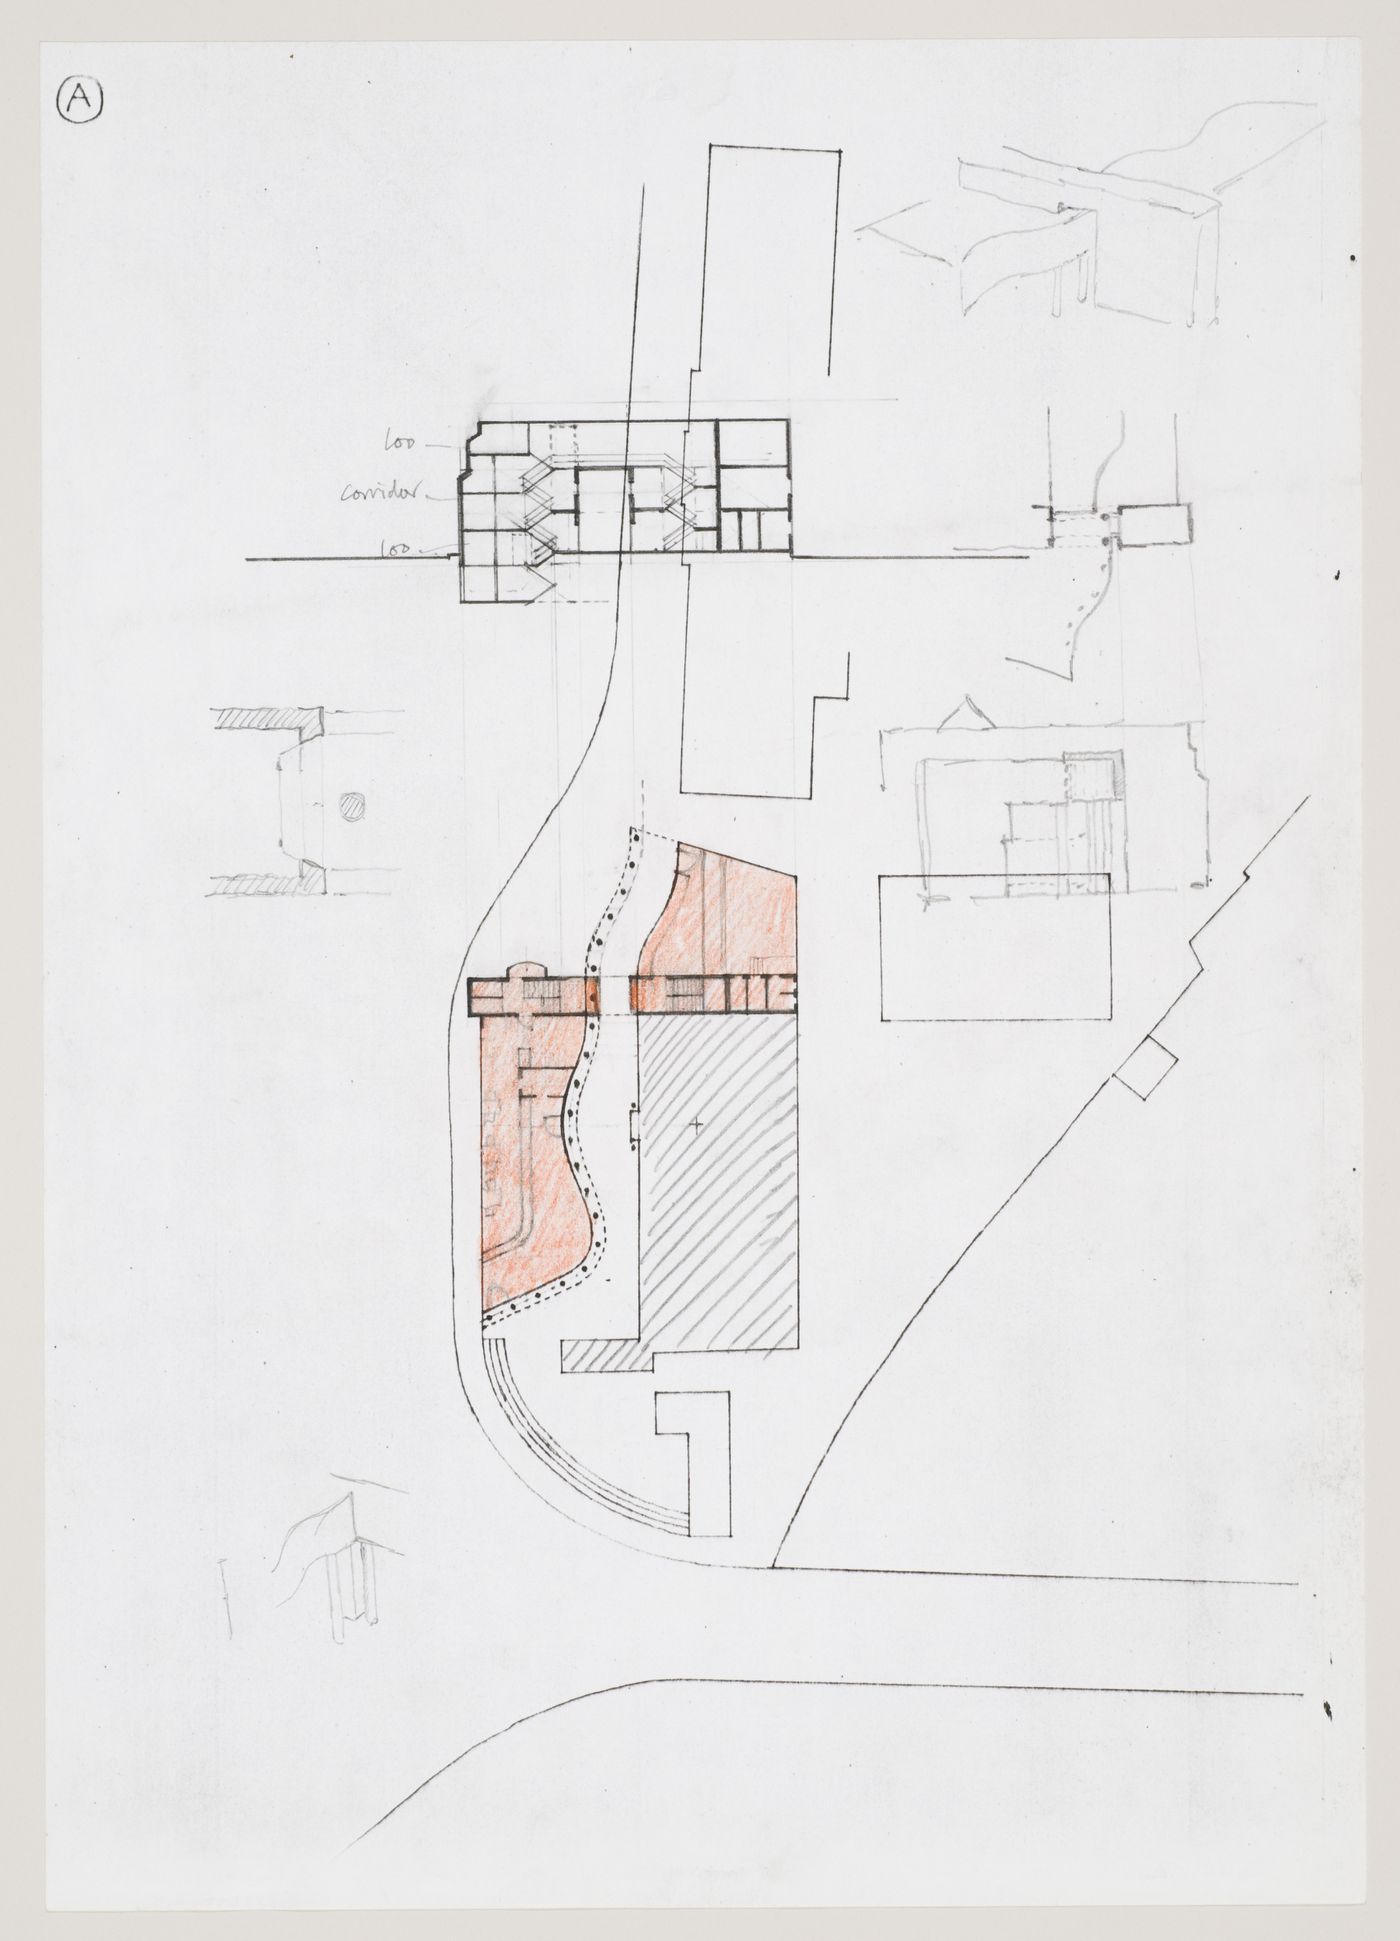 Dresdner Bank, Marburg, Germany: plan, section and details